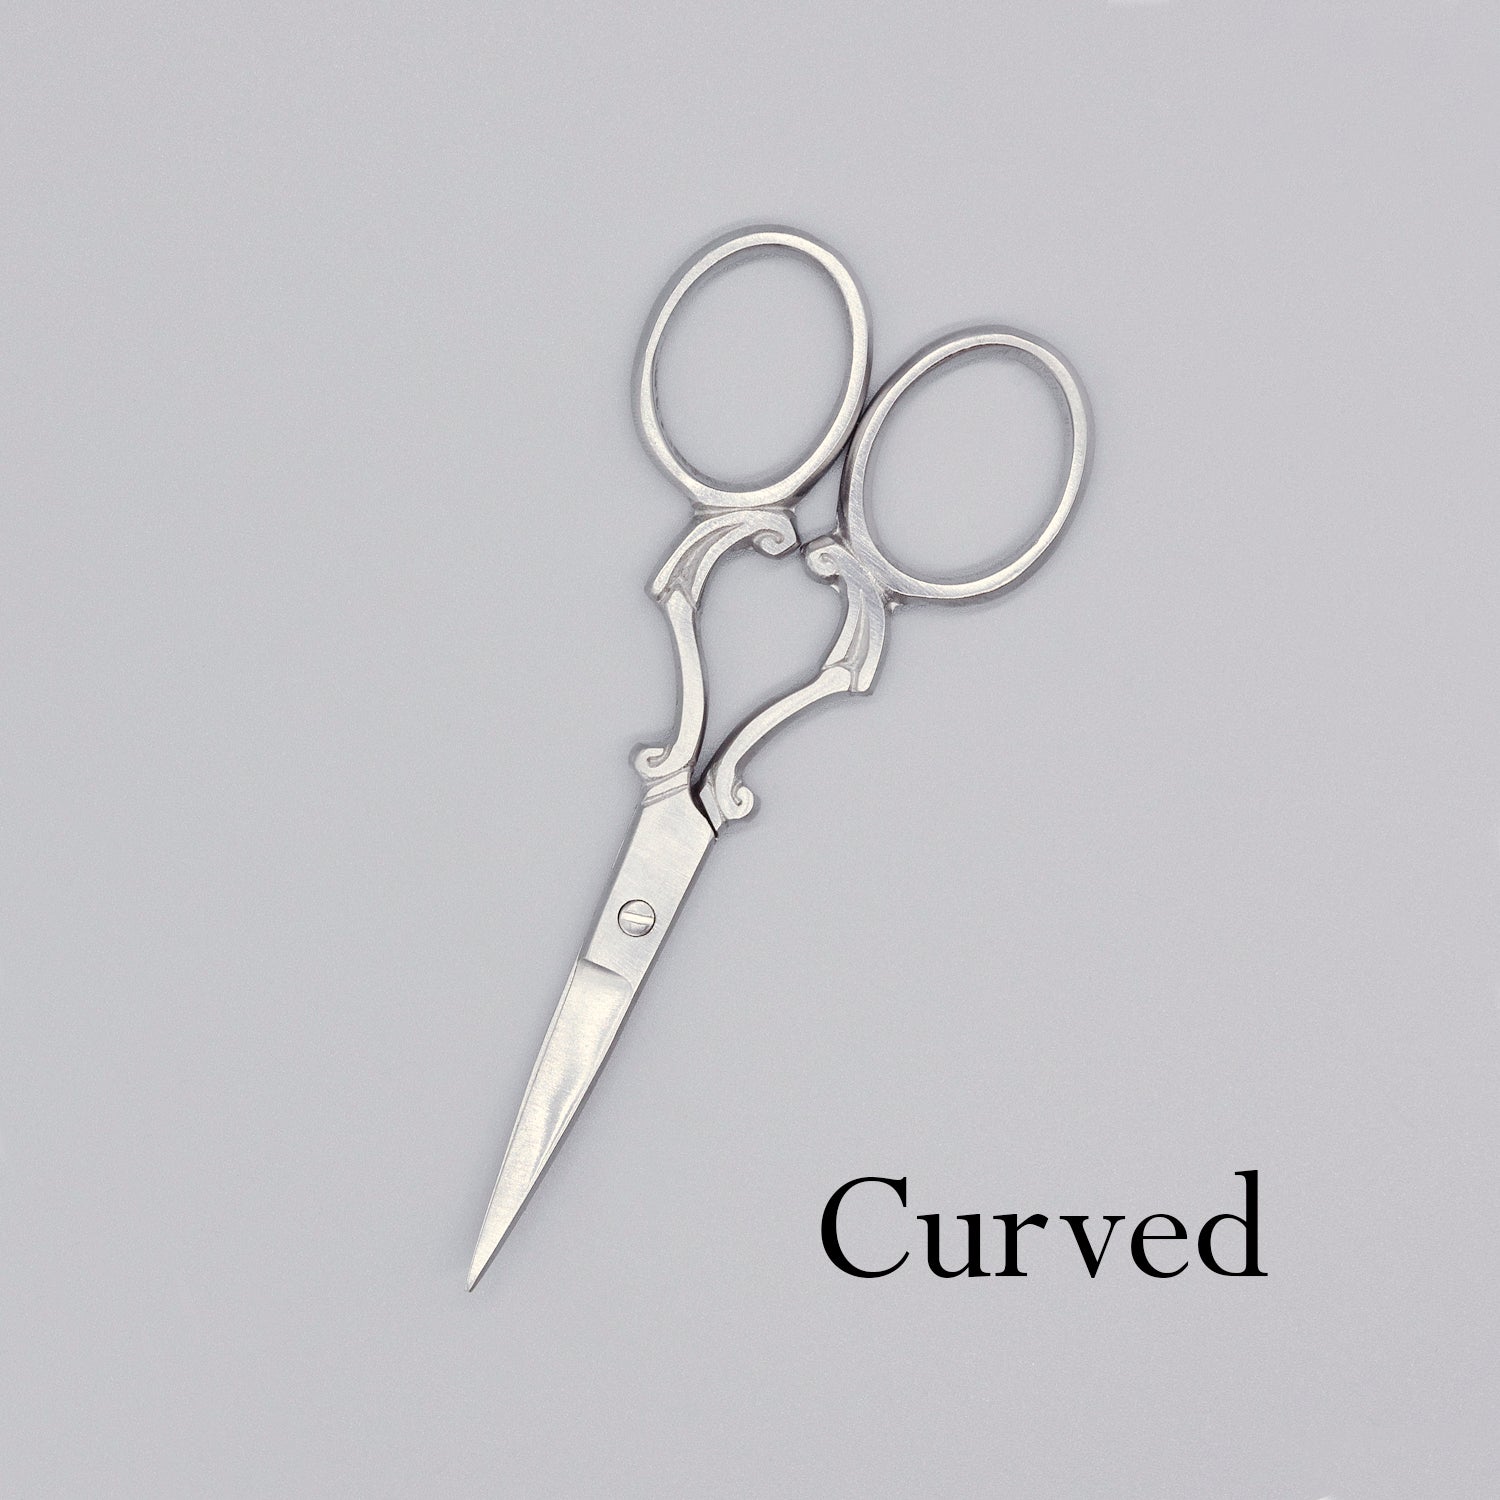 Curved Embroidery Scissors - Burnley & Trowbridge Co.